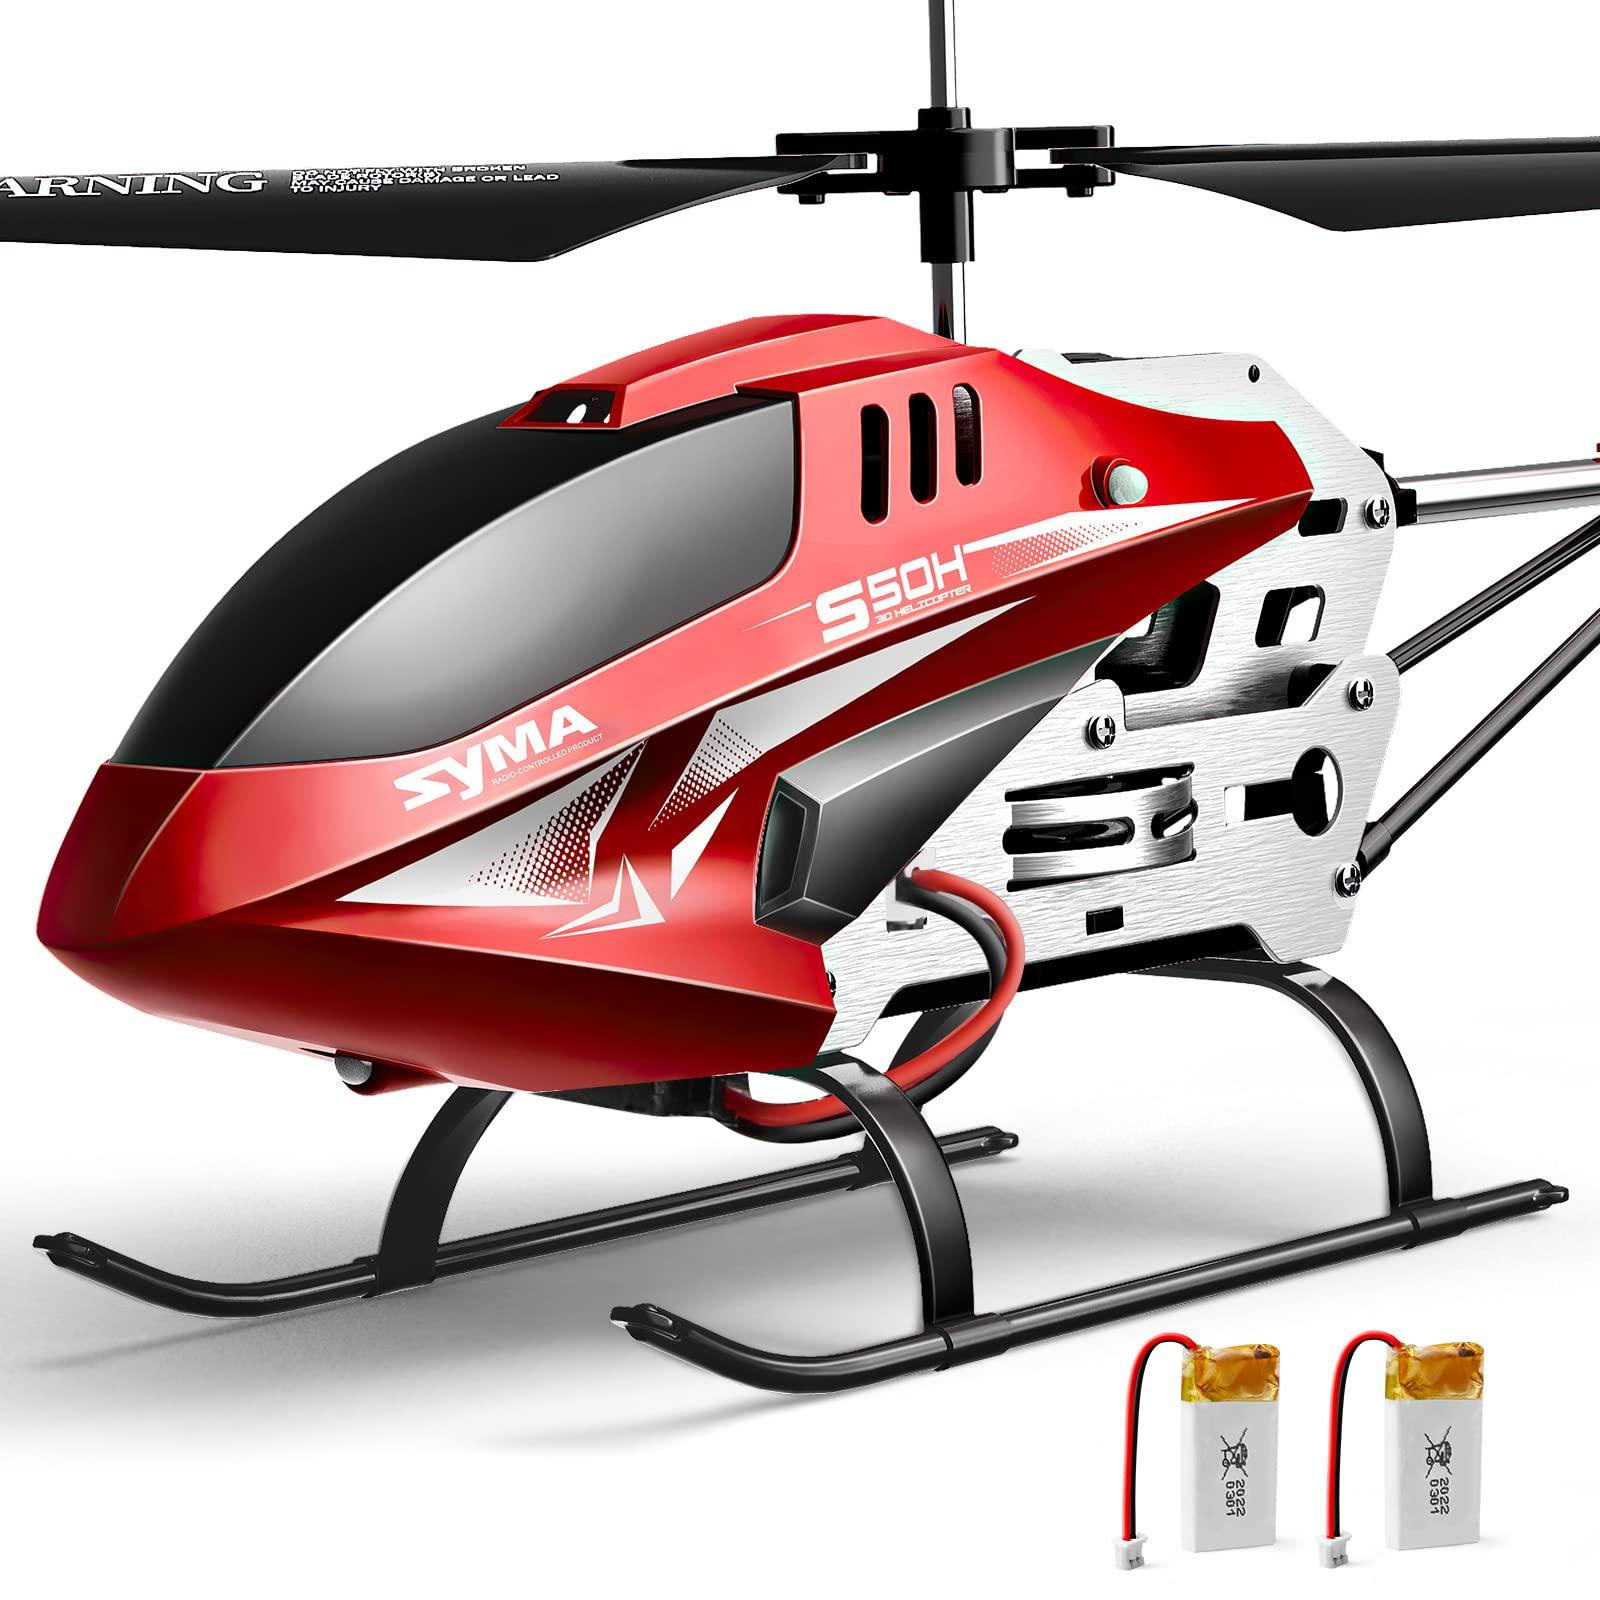 Types of RC Electric Helicopters for Beginners